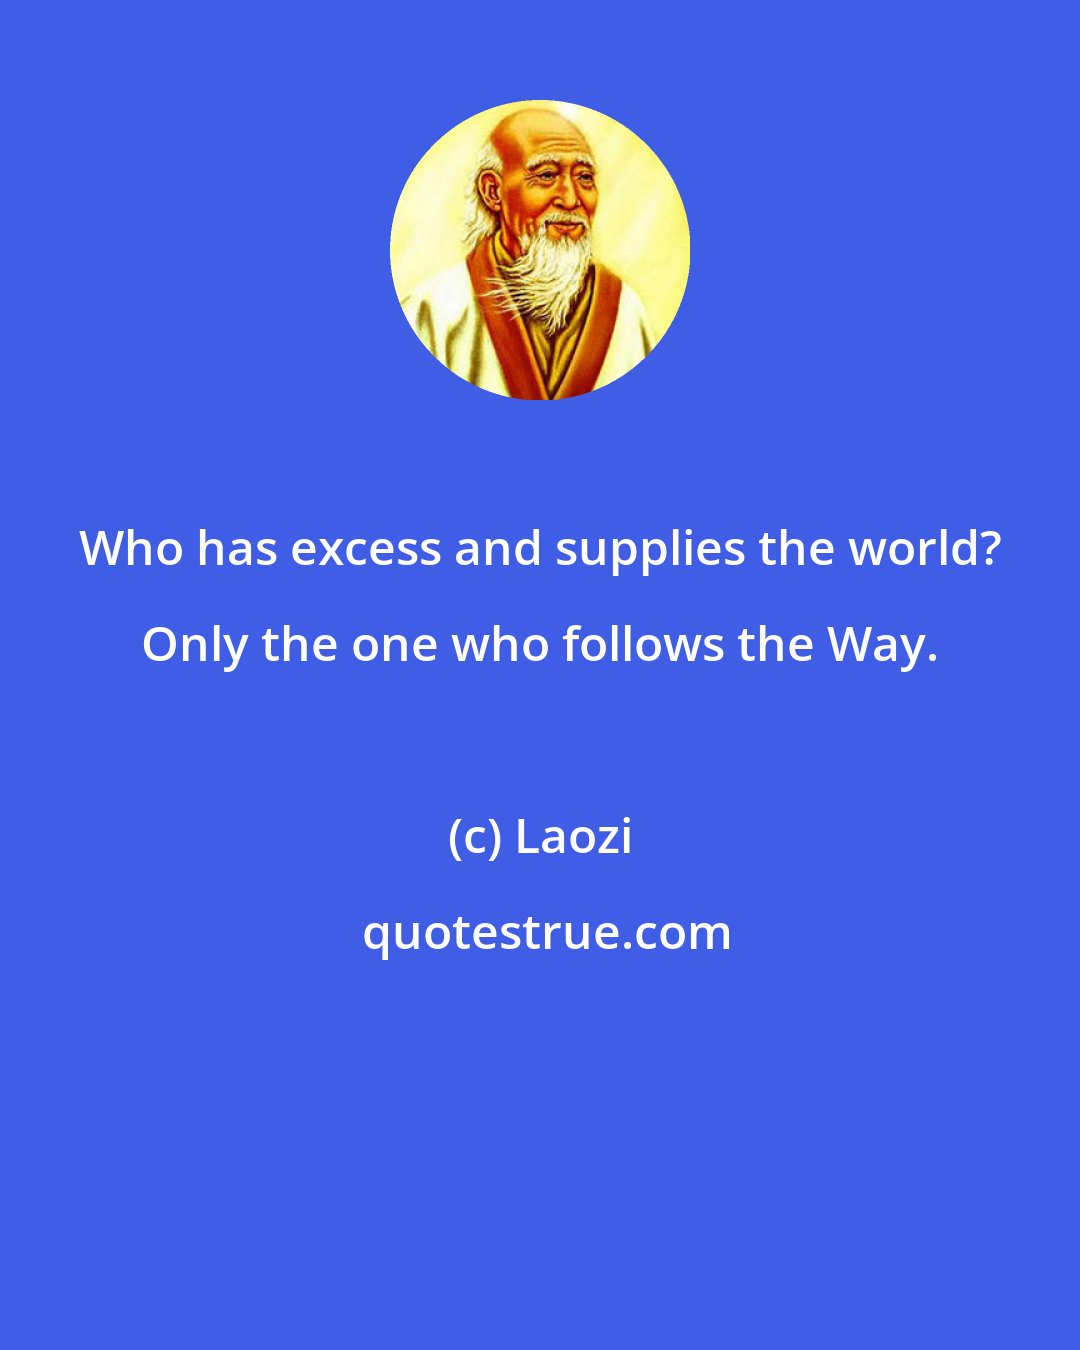 Laozi: Who has excess and supplies the world? Only the one who follows the Way.